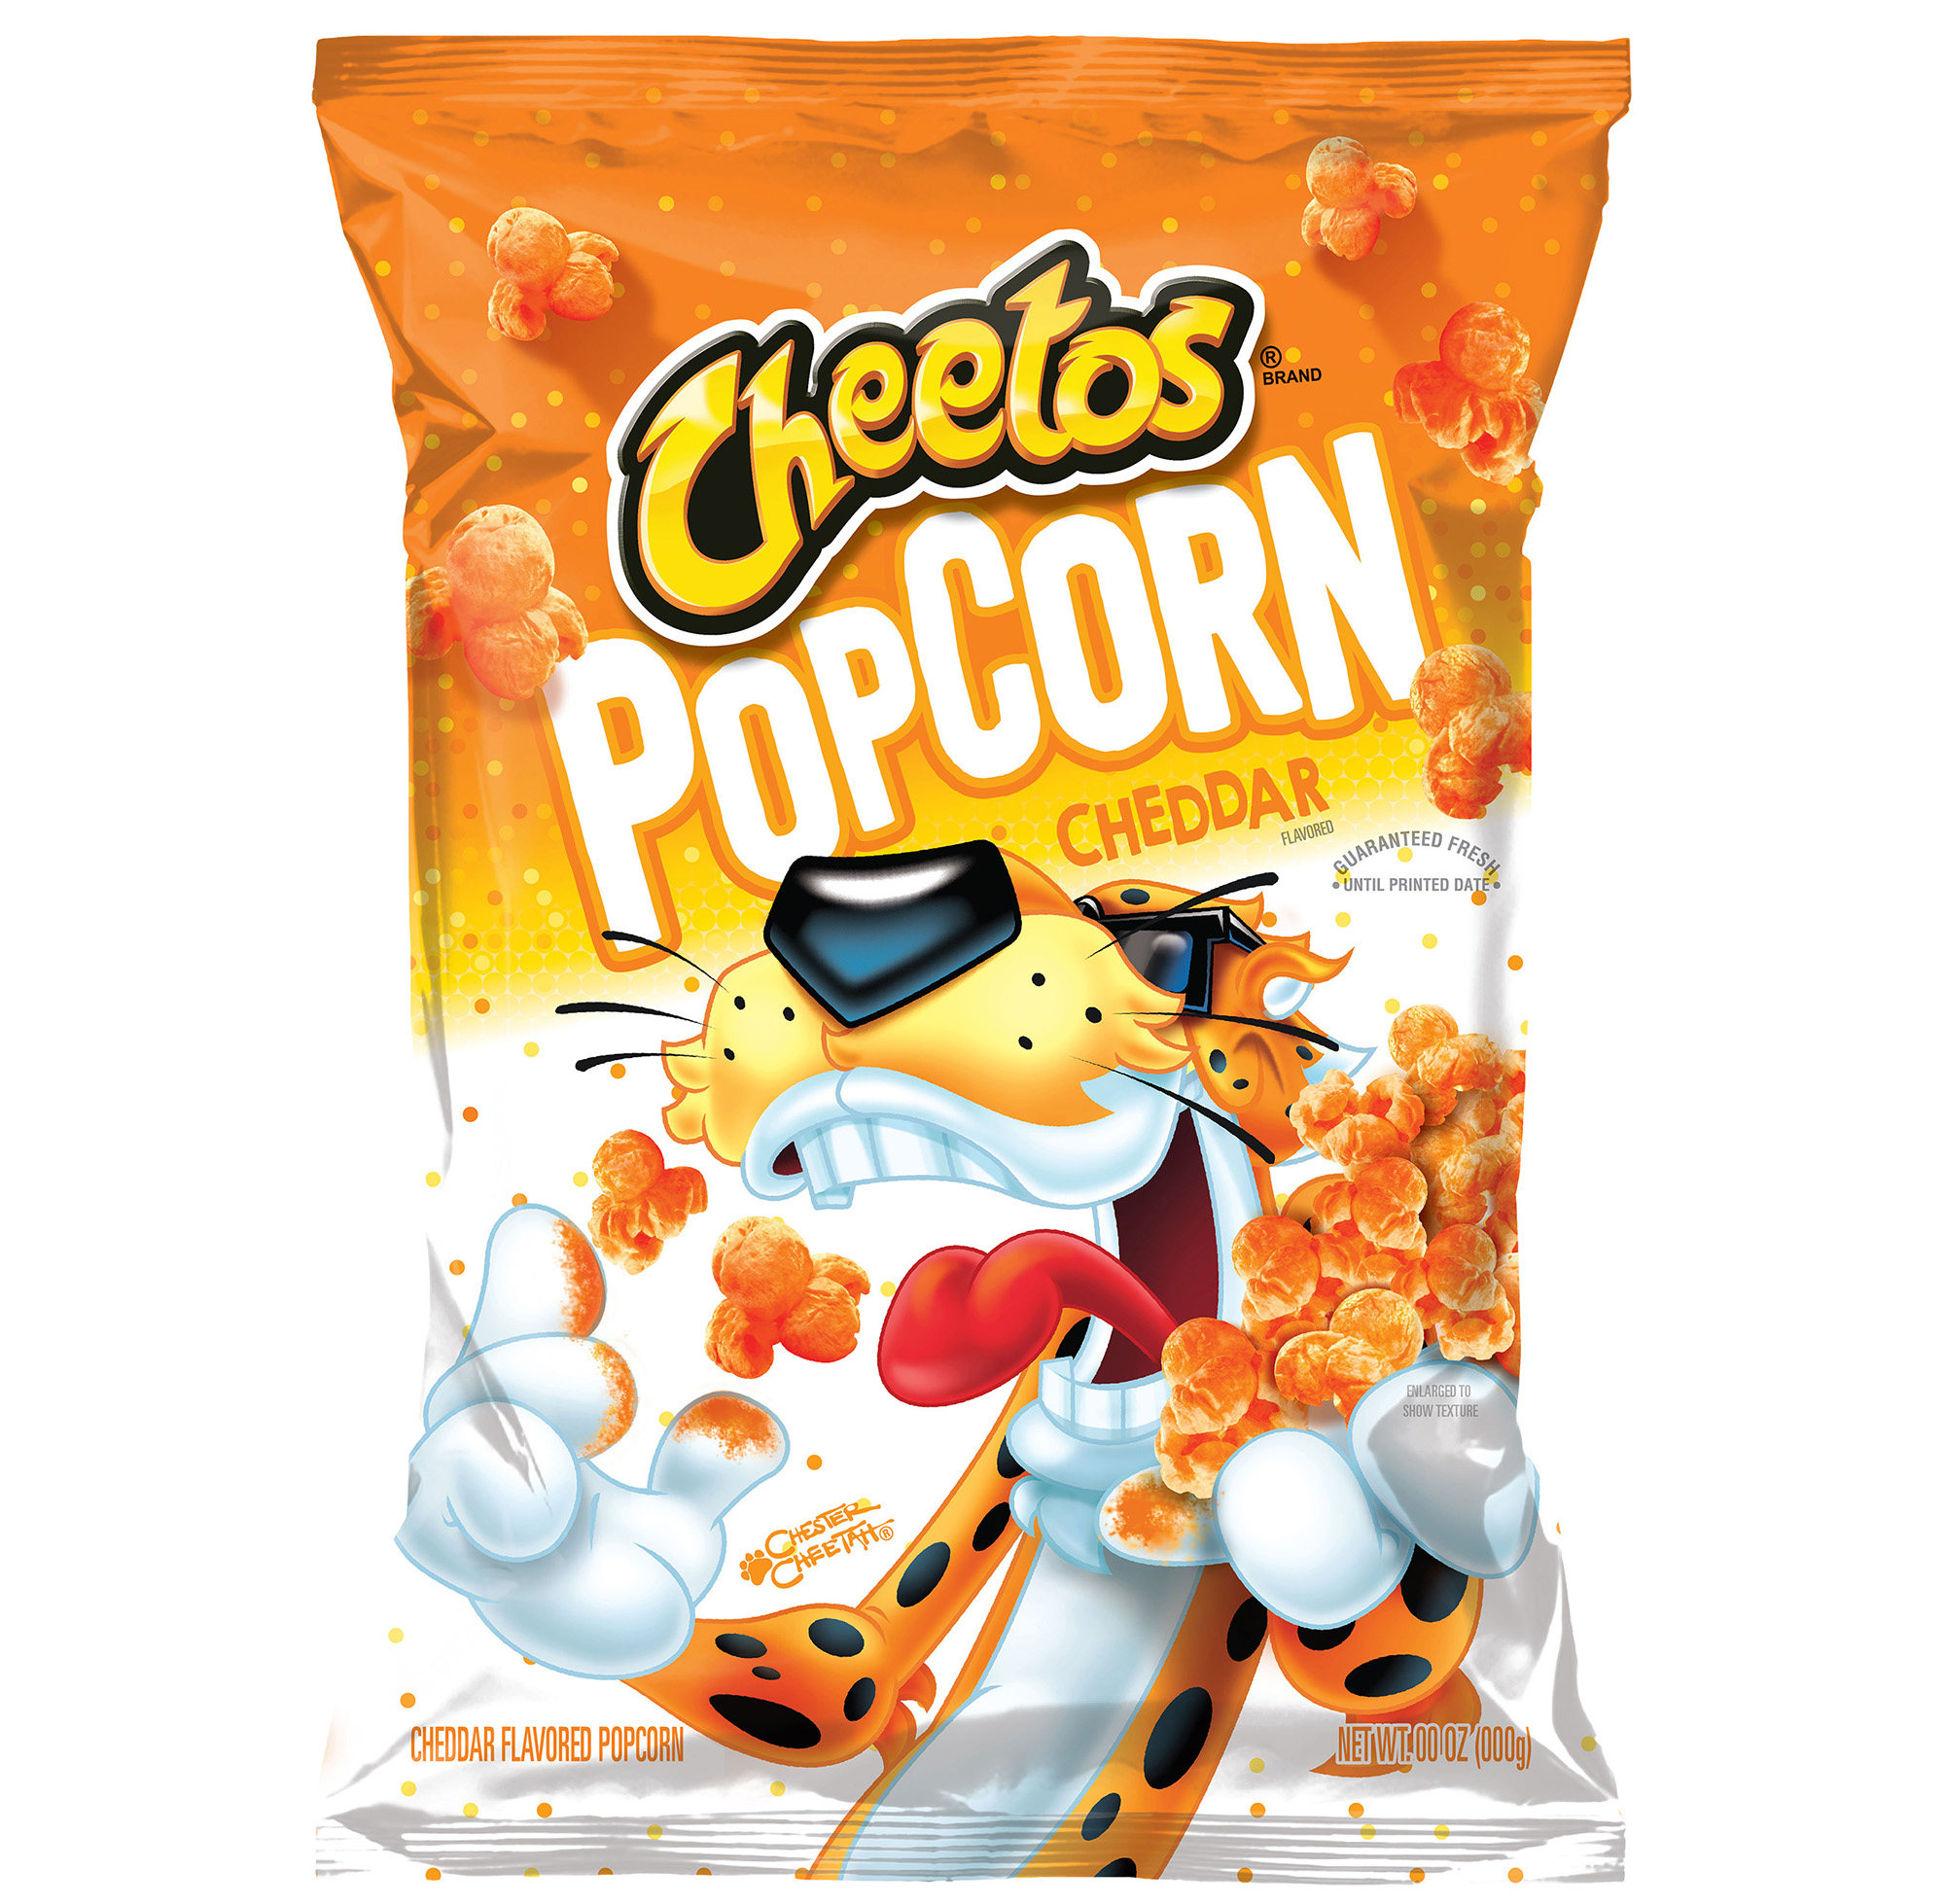 It’s A Cheetos Thing